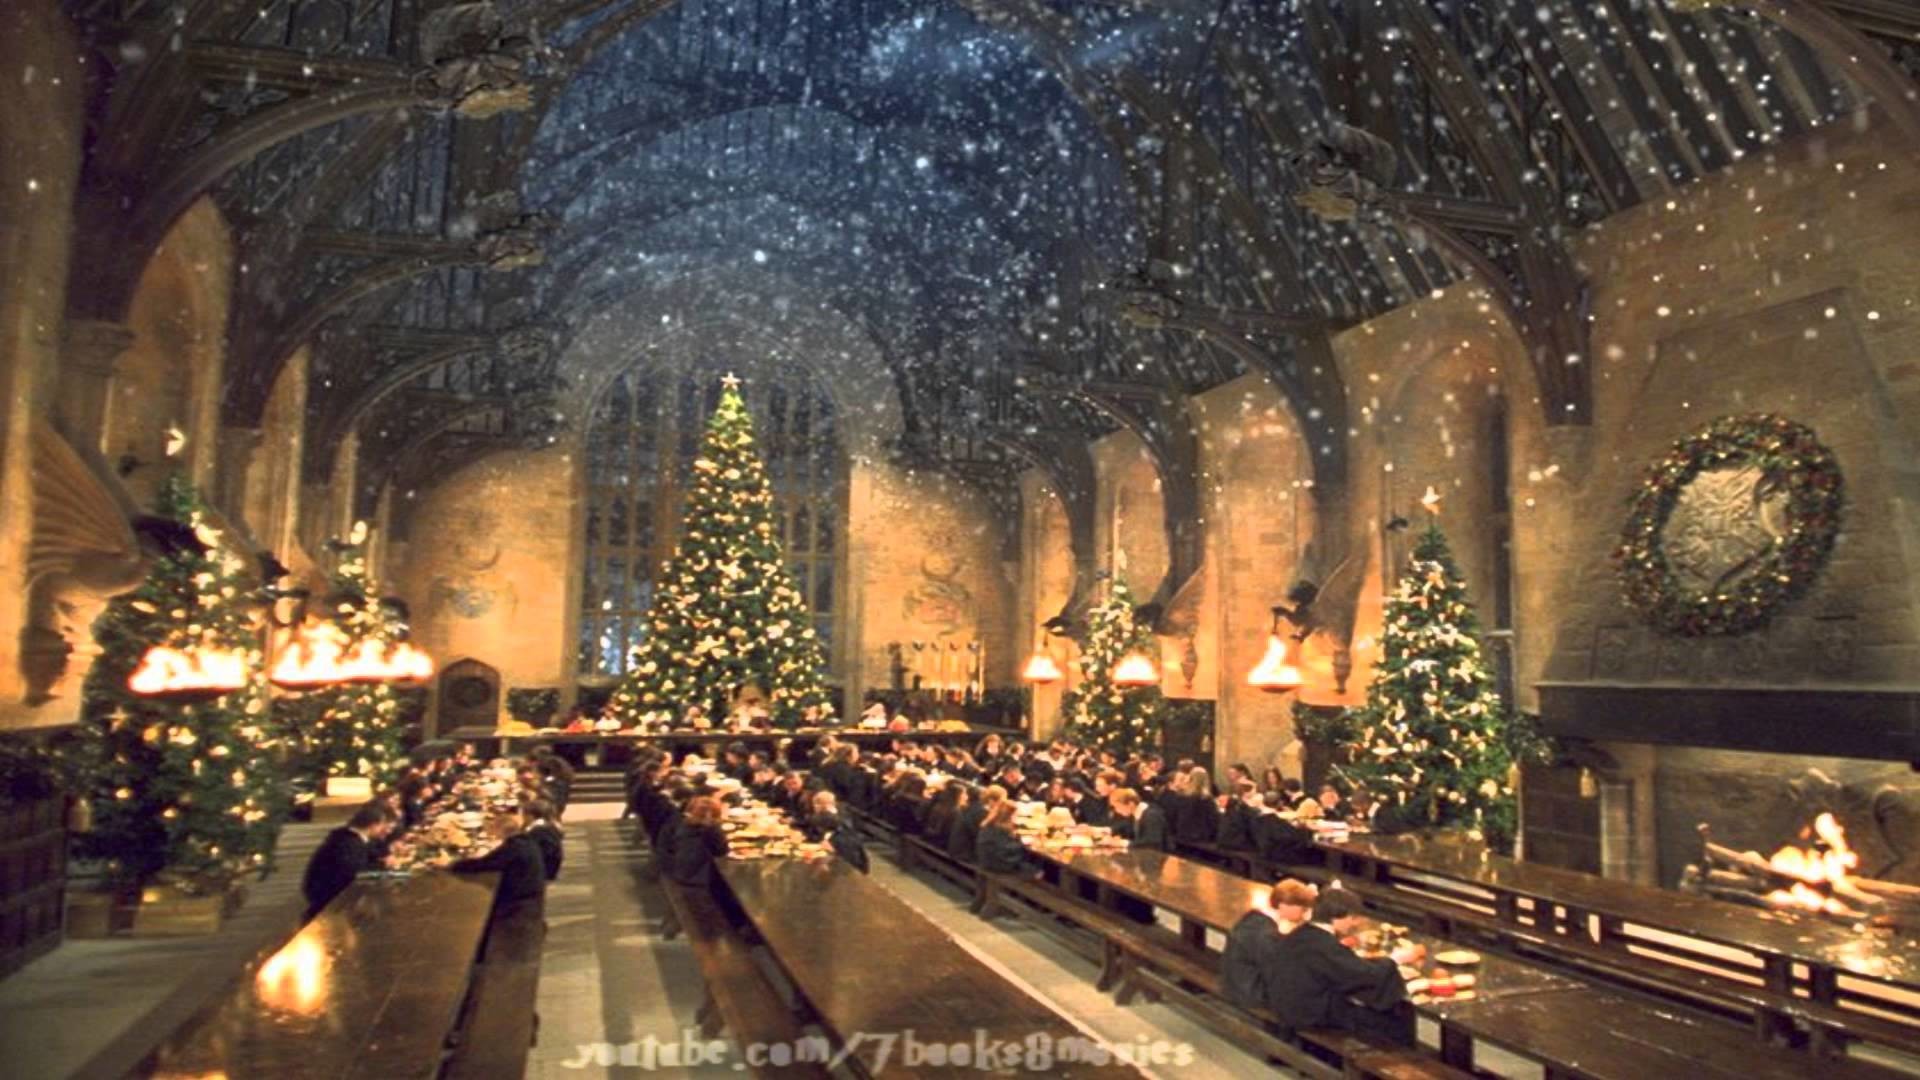 … Fantastic Christmas Harry Potter Movies Widescreen Wallpapers 1920Ã1080  pixels We Try to Present Christmas